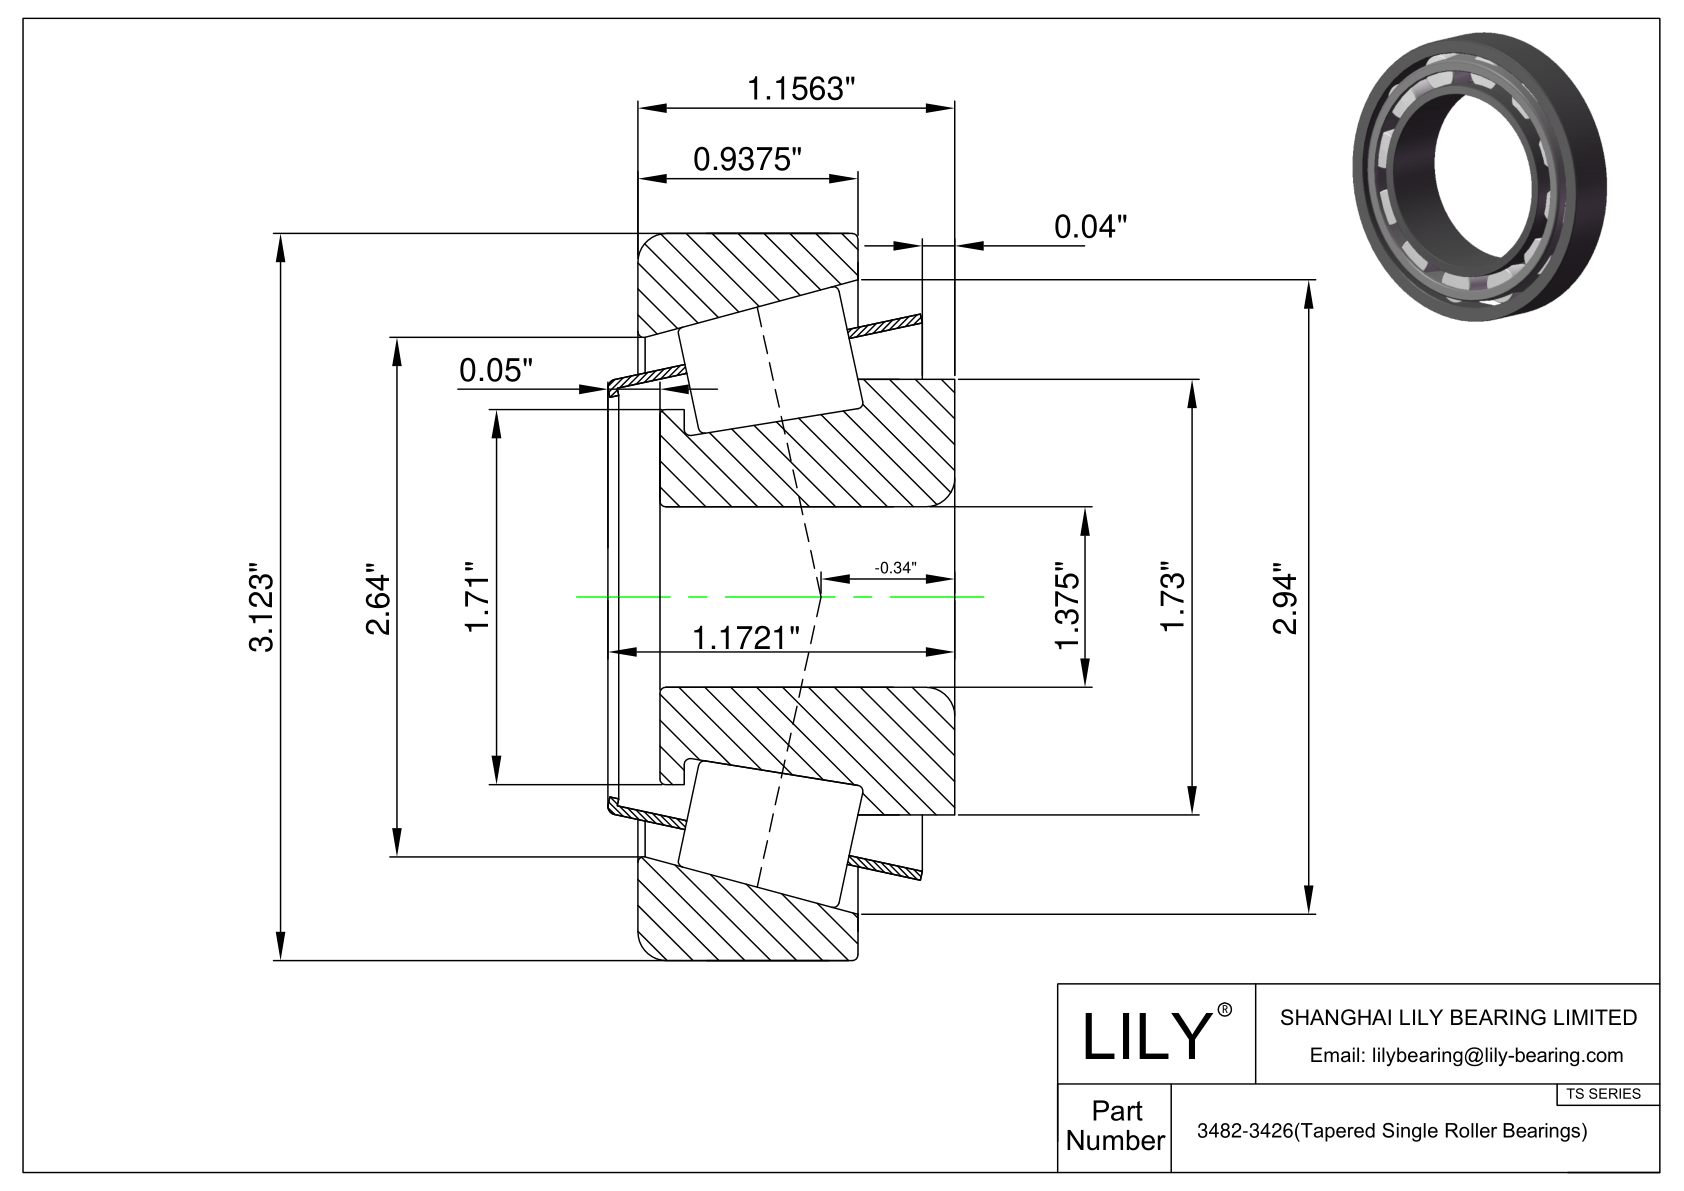 3482-3426 TS (Tapered Single Roller Bearings) (Imperial) cad drawing